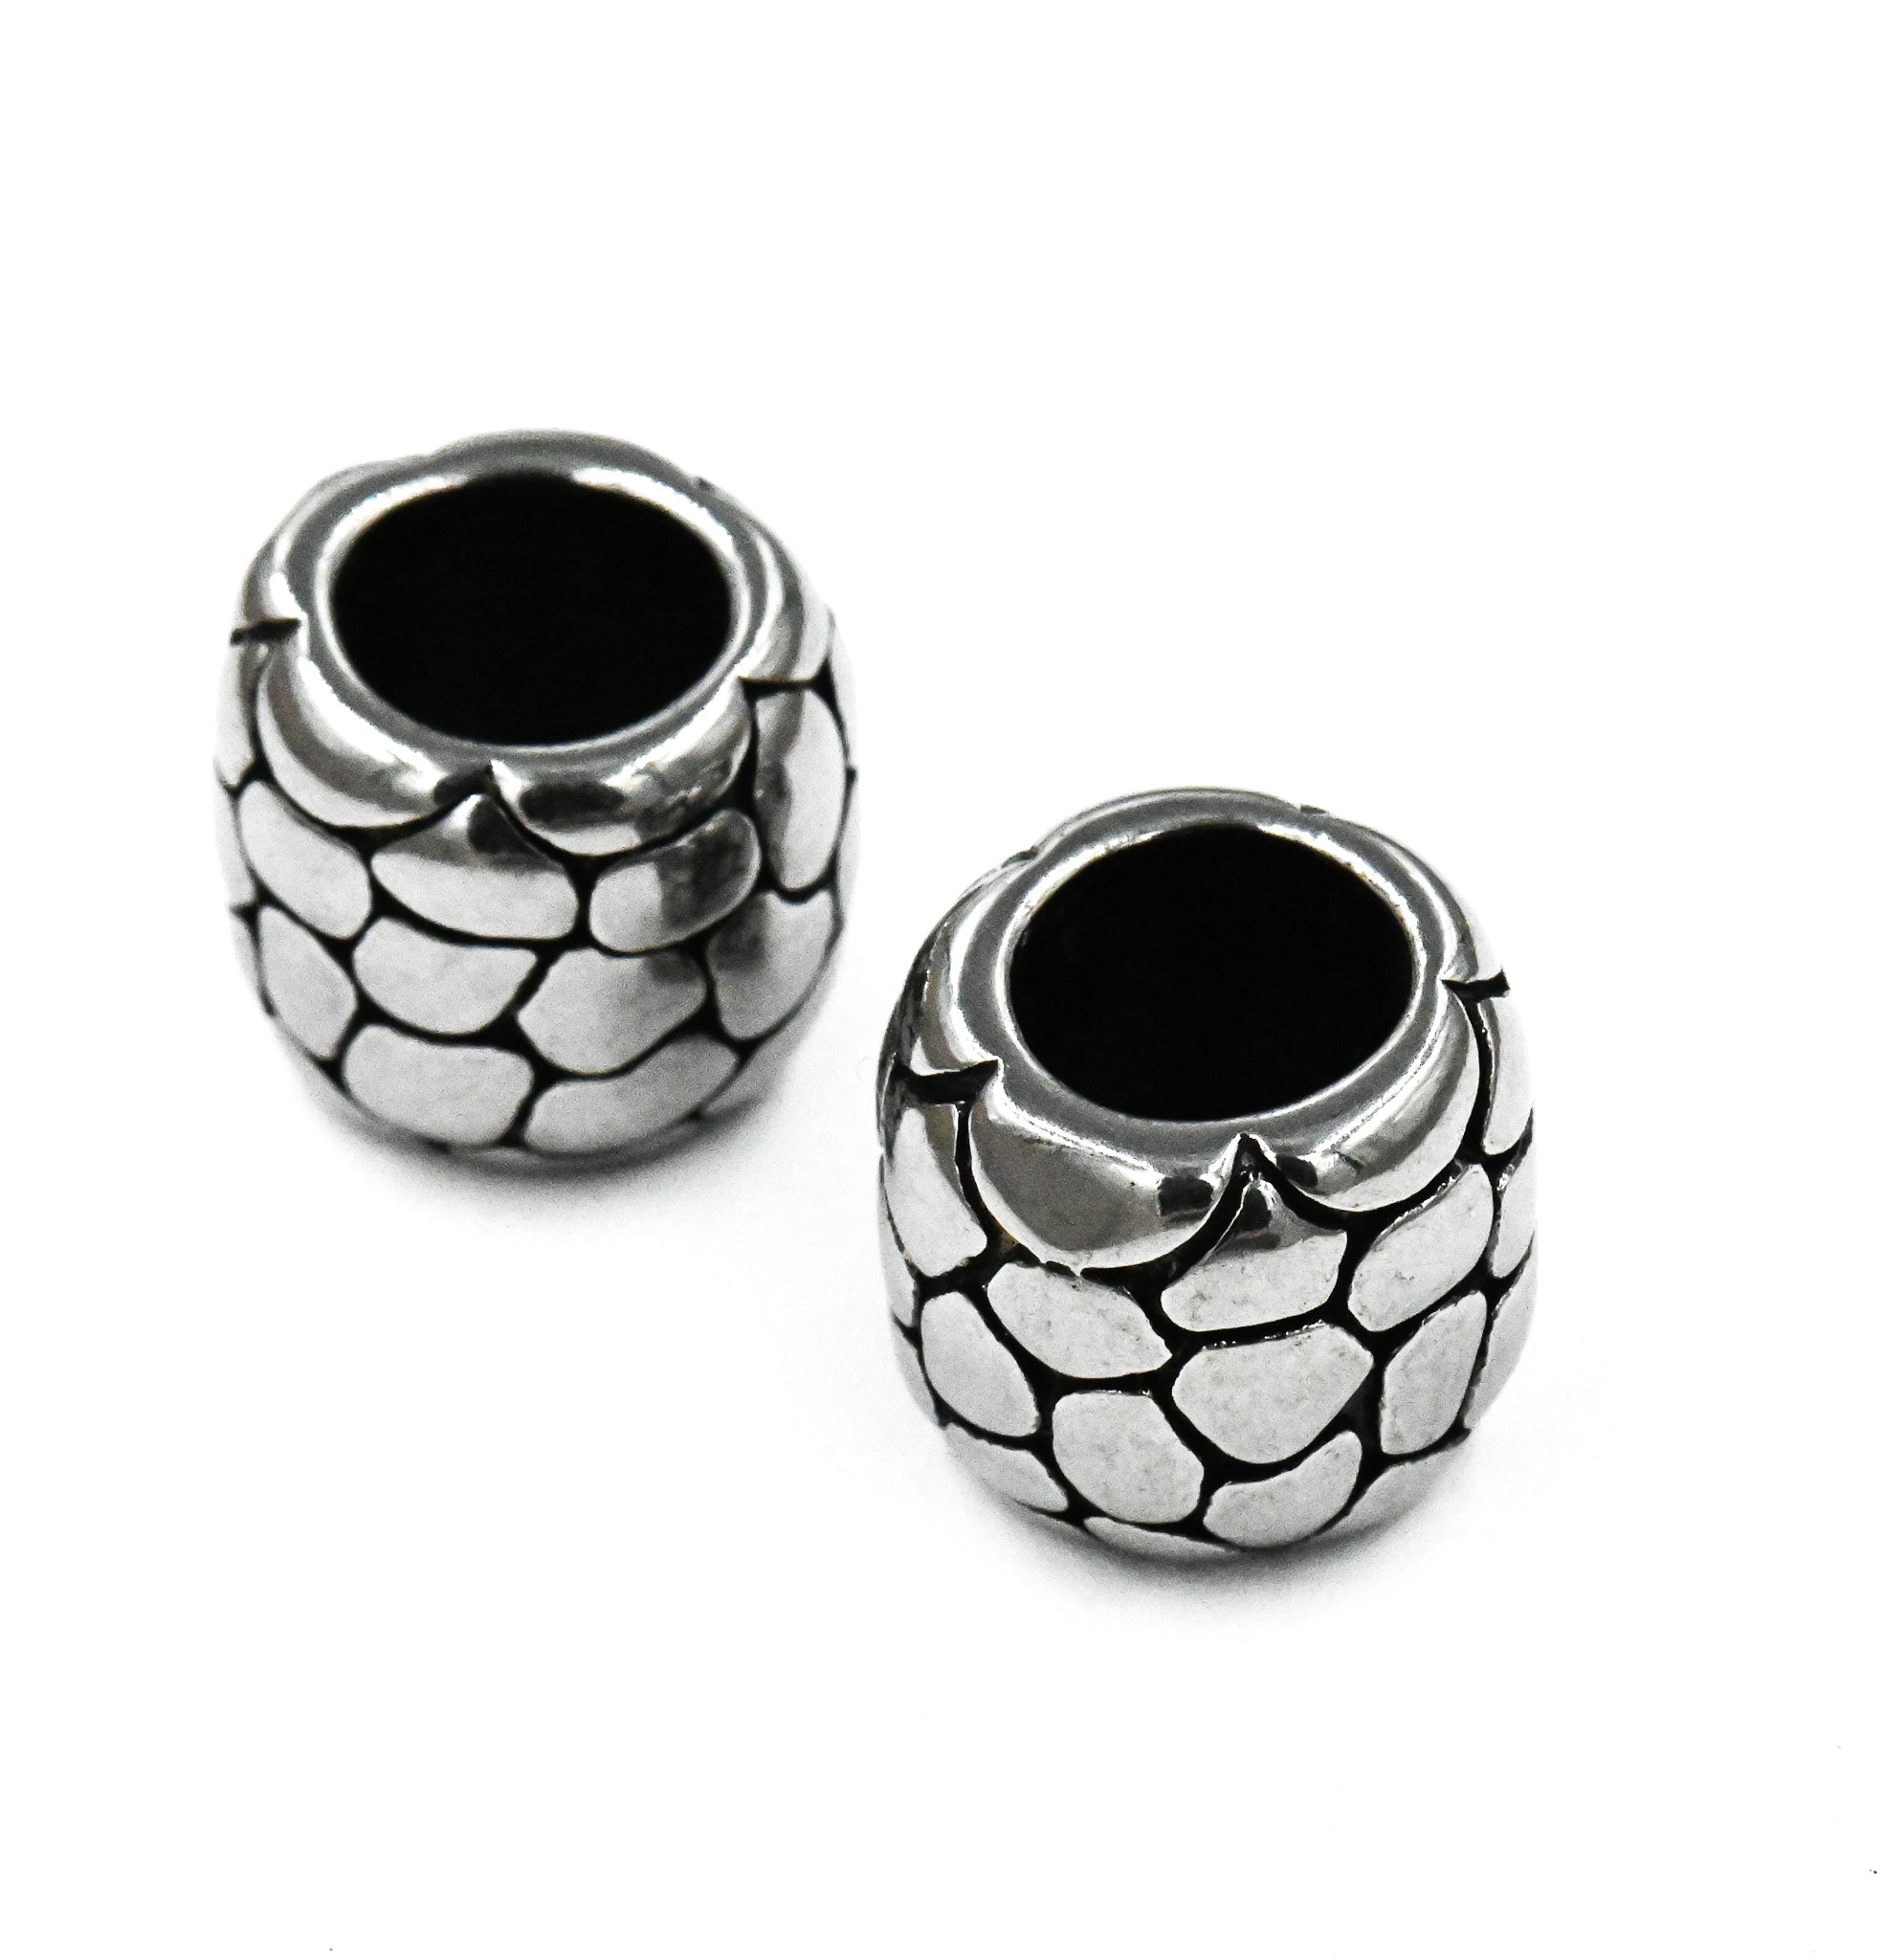 Stainless Steel Beads, Large Hole Beads, Barrel, Antique Silver, 12x11mm